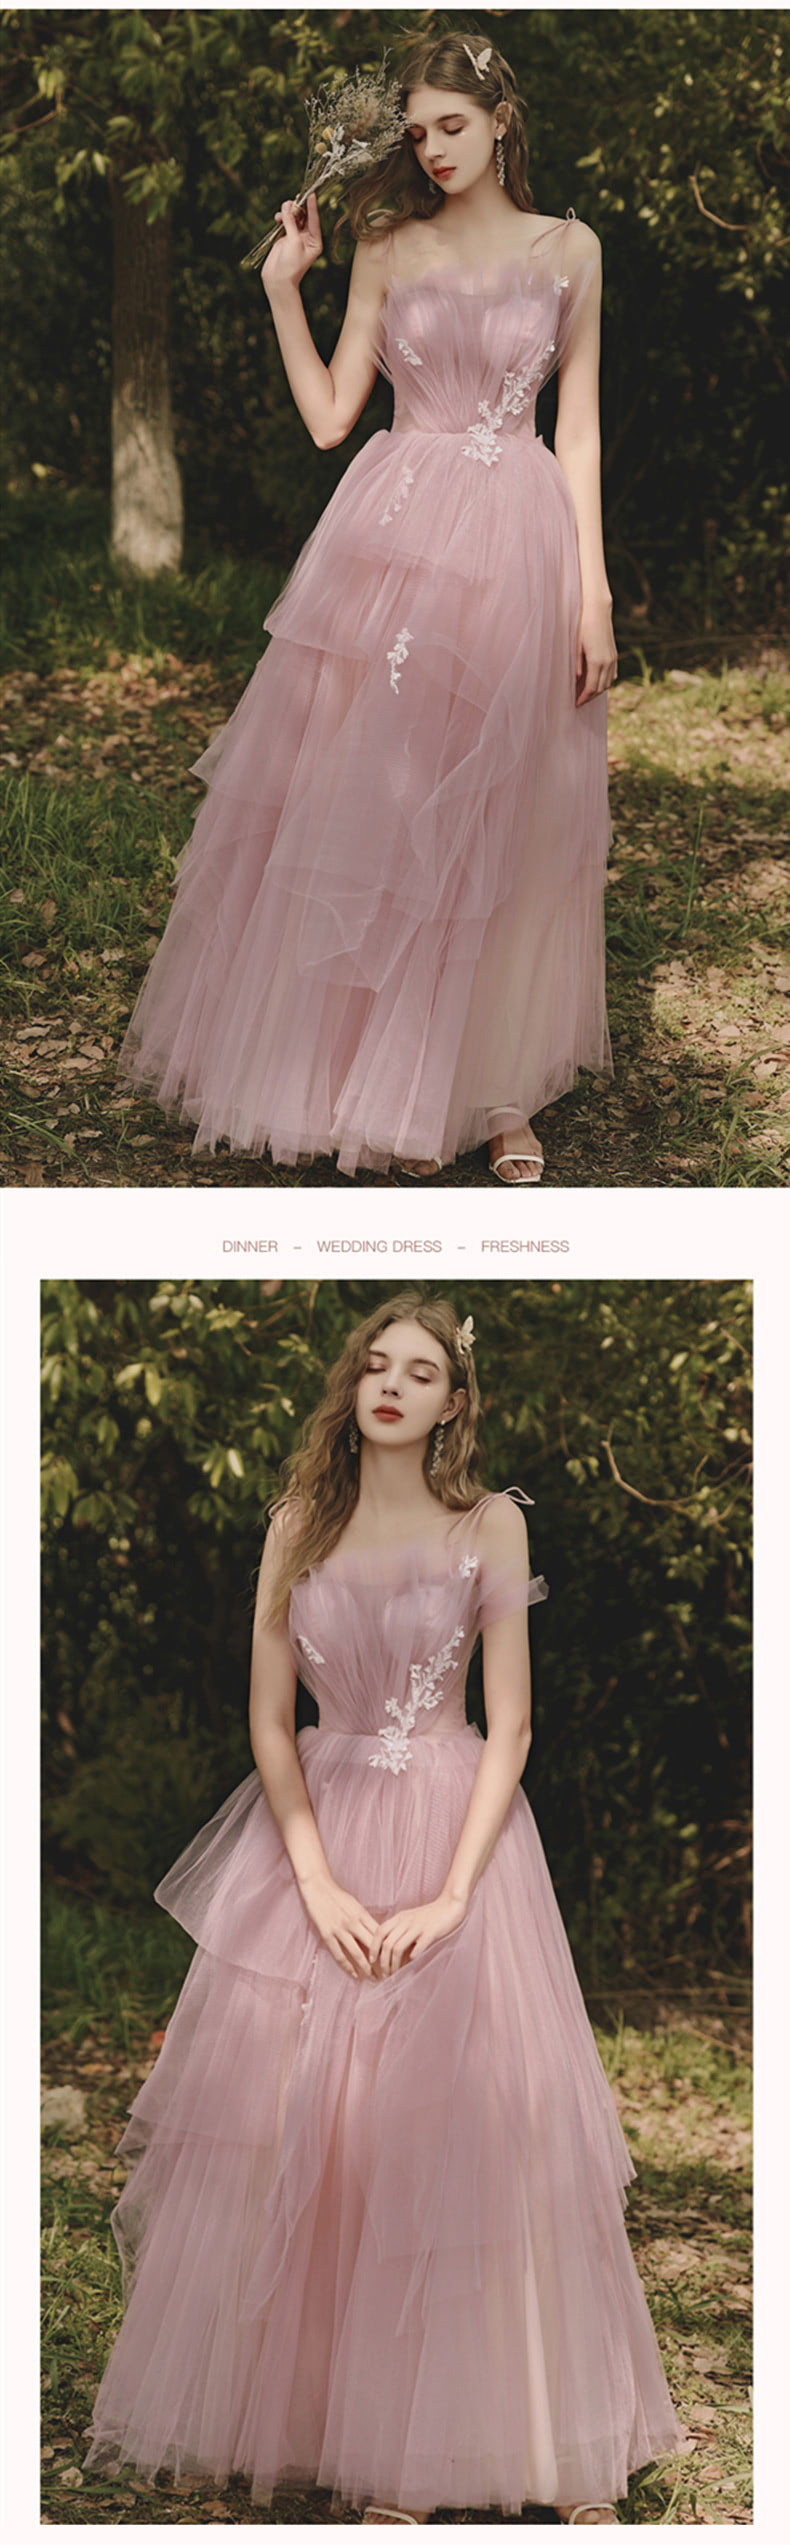 Fairy-Pink-Tulle-Layered-Lace-Slip-Dress-Long-Evening-Party-Gown13.jpg